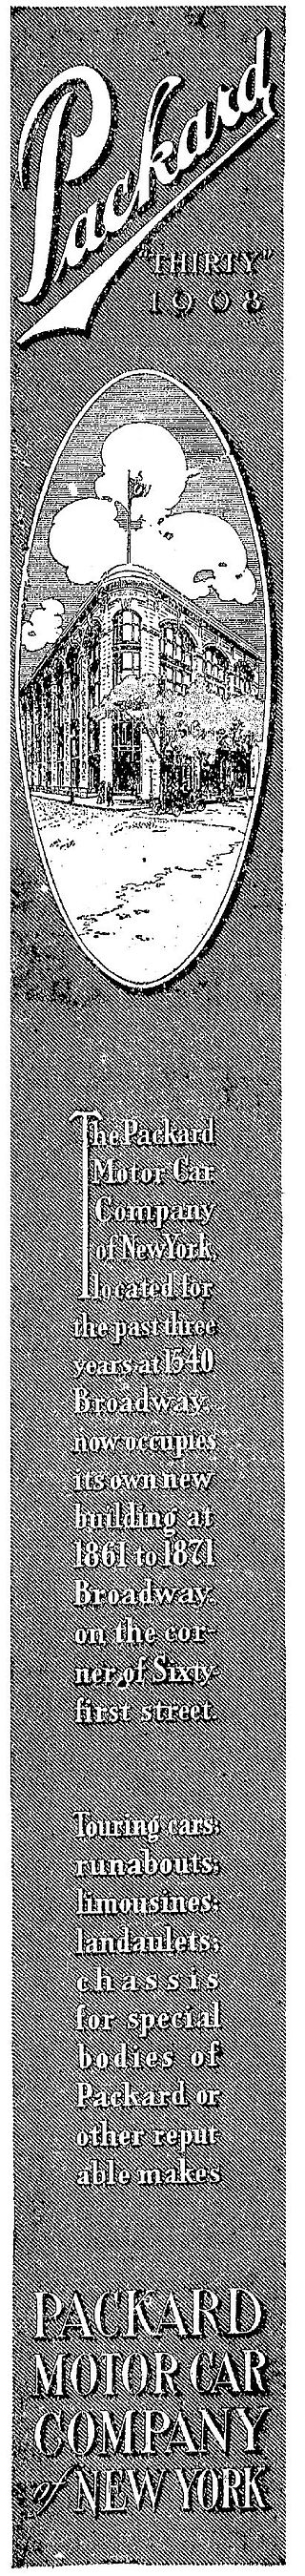 1907 Packard ad The New York Times 1907-11-06